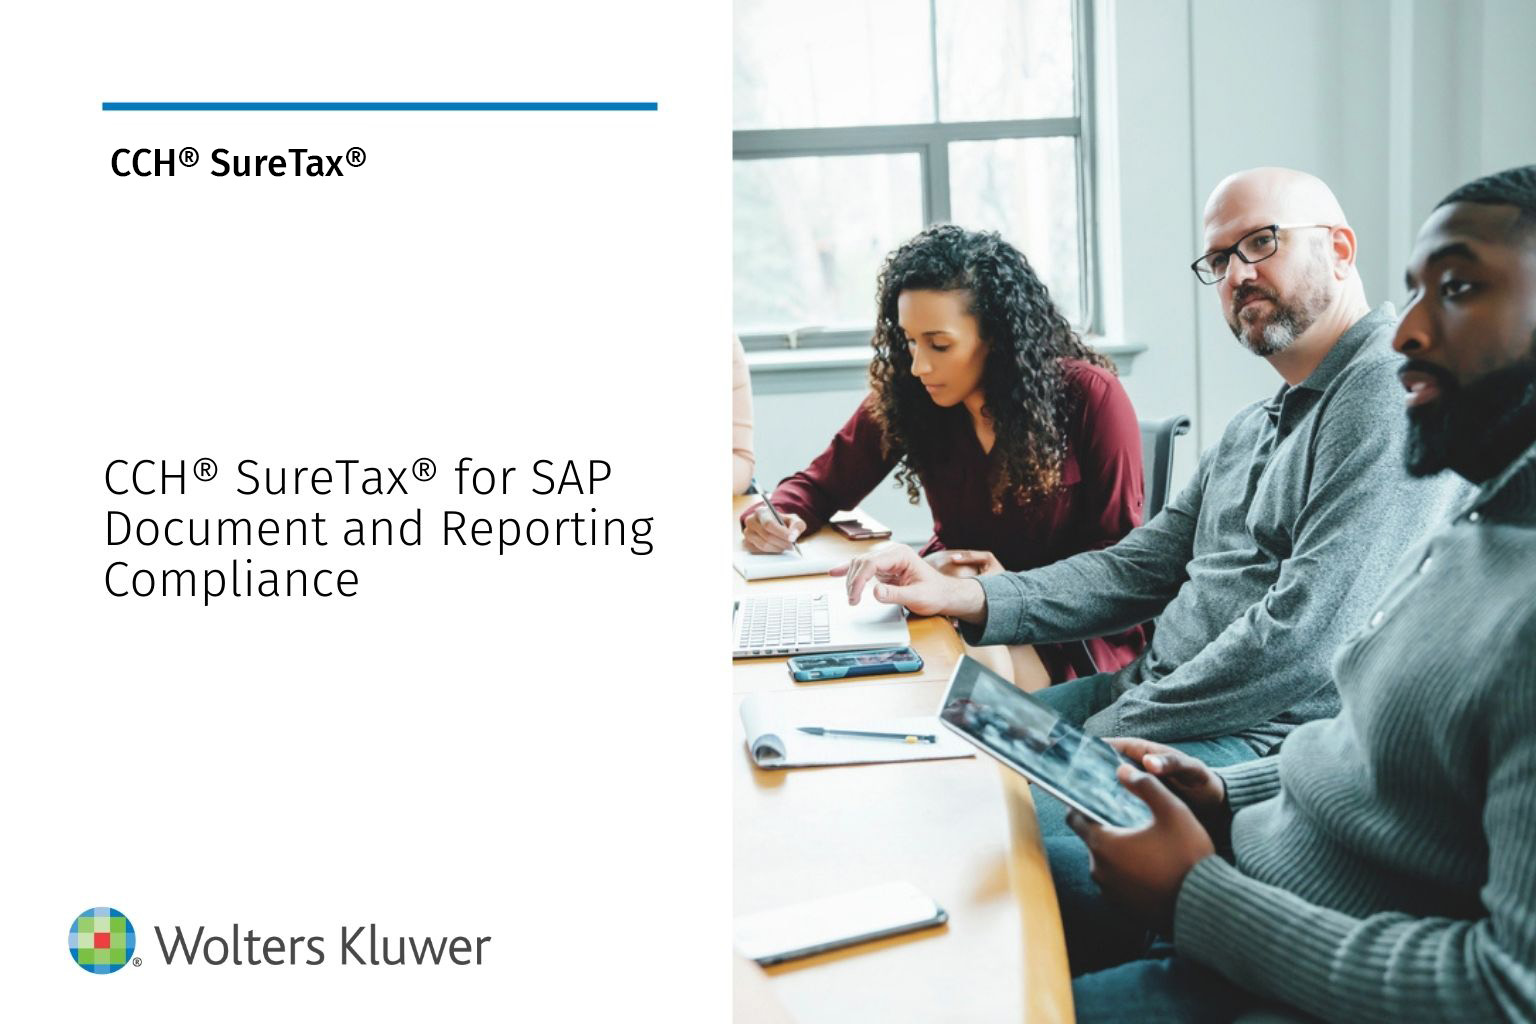 CCH® SureTax® for SAP Document and Reporting Compliance